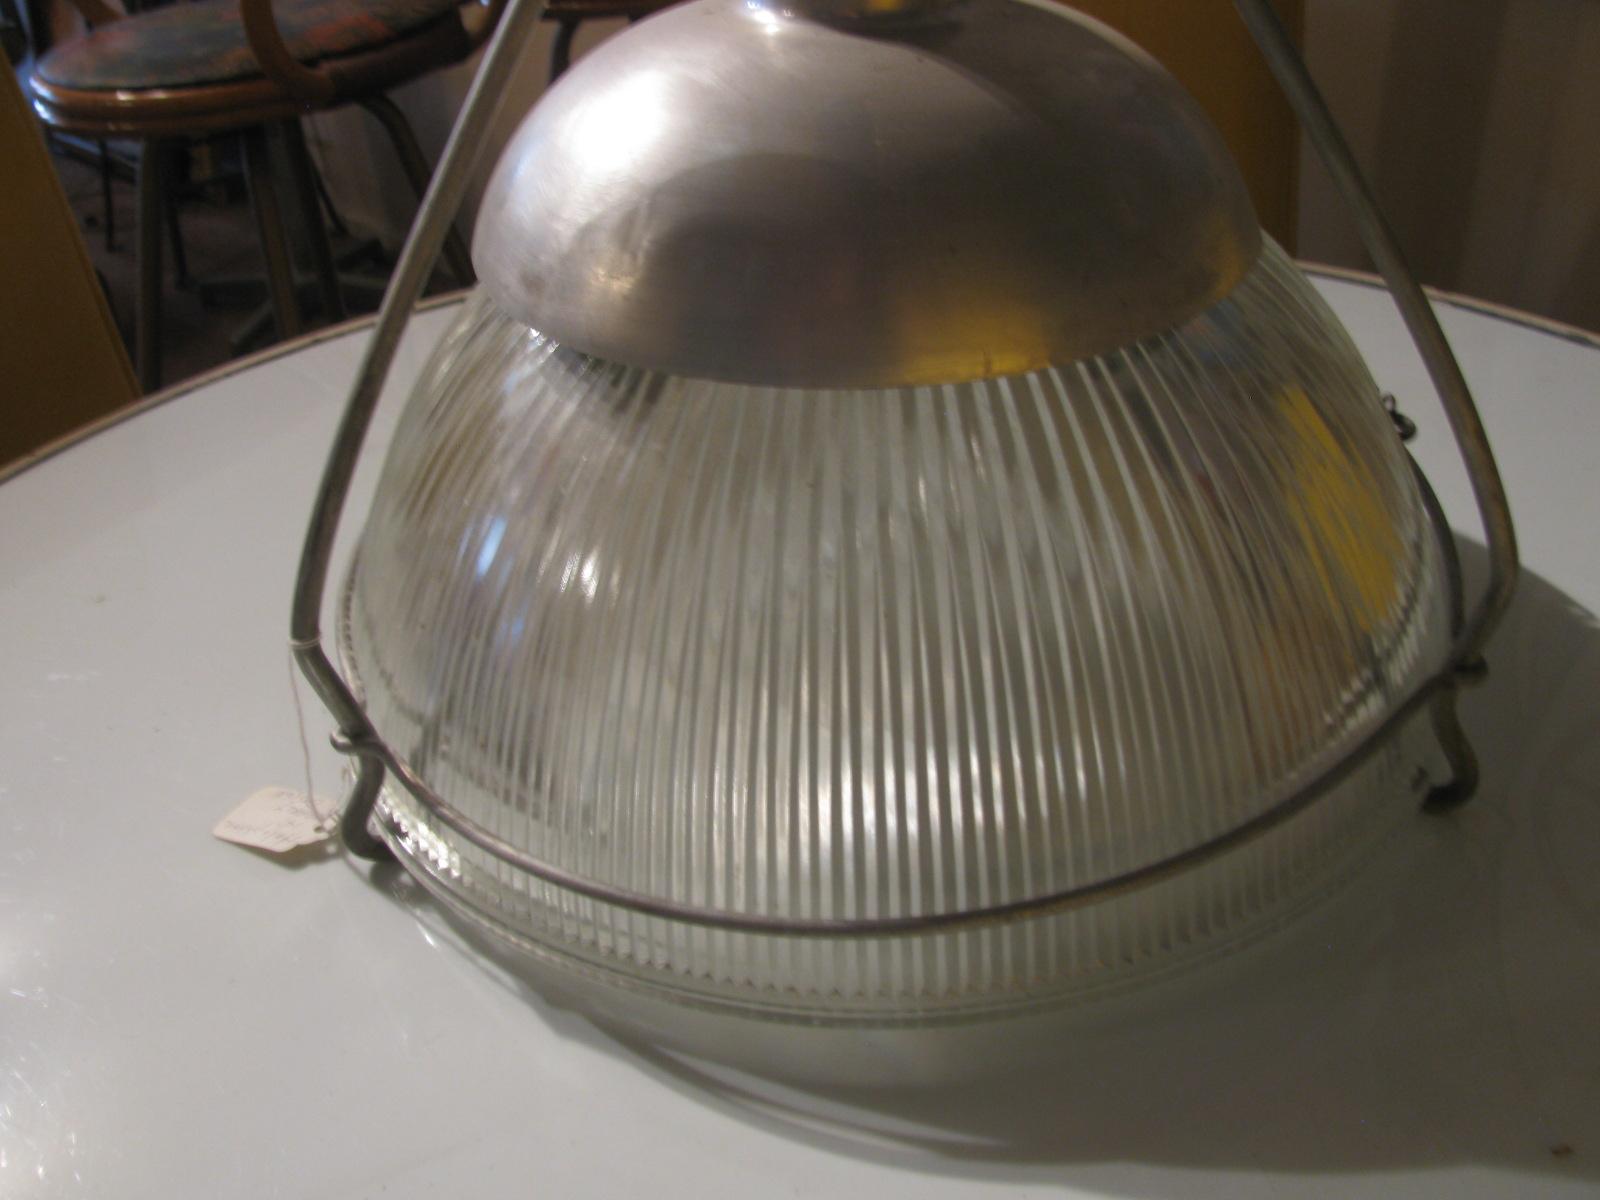 Original Holophane industrial pendant lamp with new wiring. One of the earliest examples of this type of lighting that I have seen. In excellent condition, very strong and well constructed.